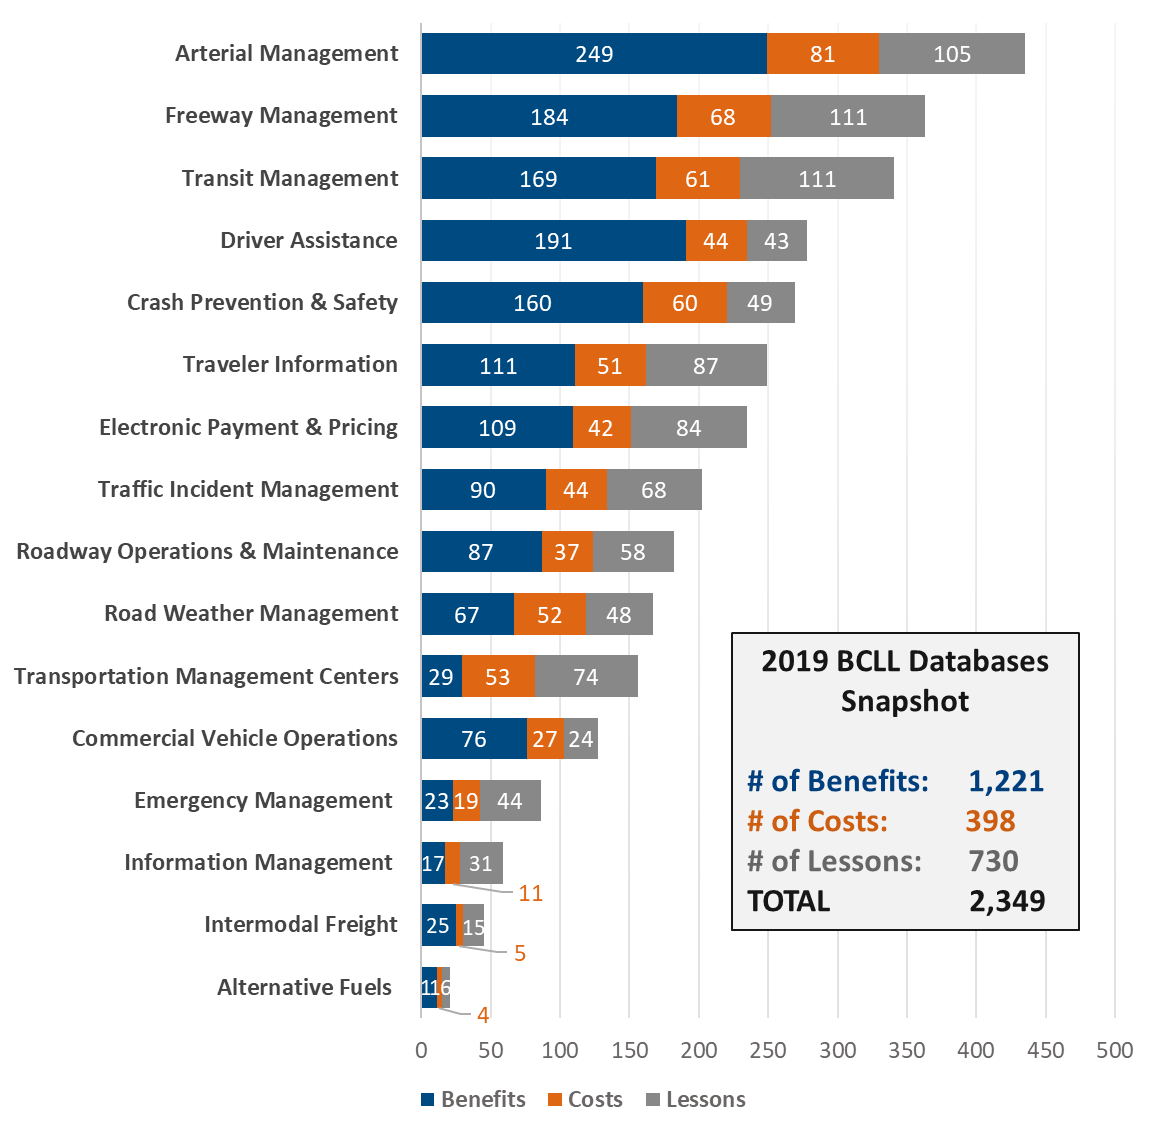 Horizontal bar chart summarizing the summaries in the BCLL database by Taxonomy/Application Area with Arterial Management with the most and Alternative Fuels with the least number of summaries.